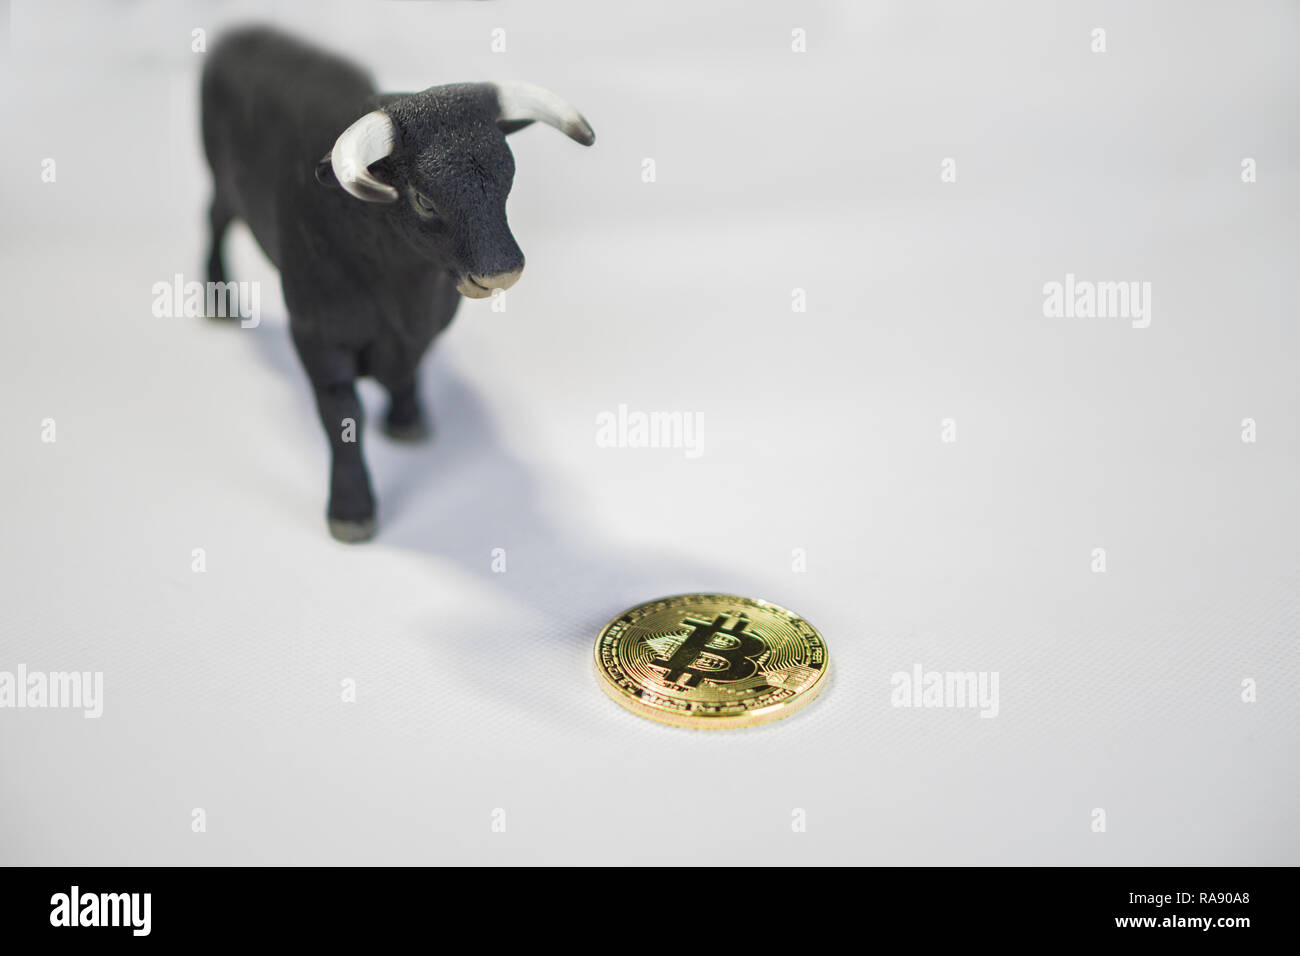 Bull market in crypto currency. Bull's shadow dropping on bitcoin coin Stock Photo